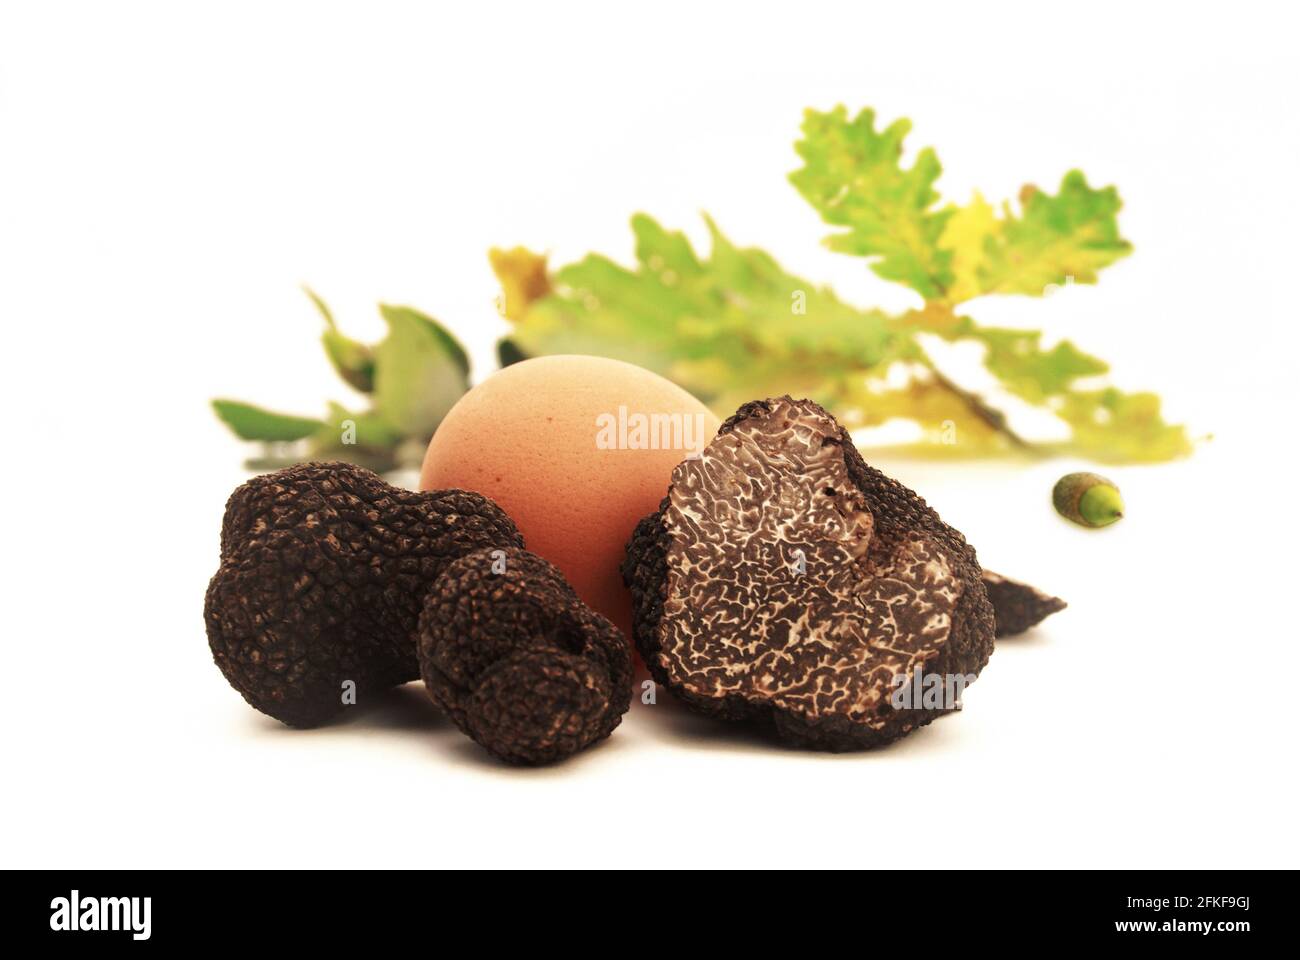 Egg and oak truffles, one of which is shown in section. Stock Photo